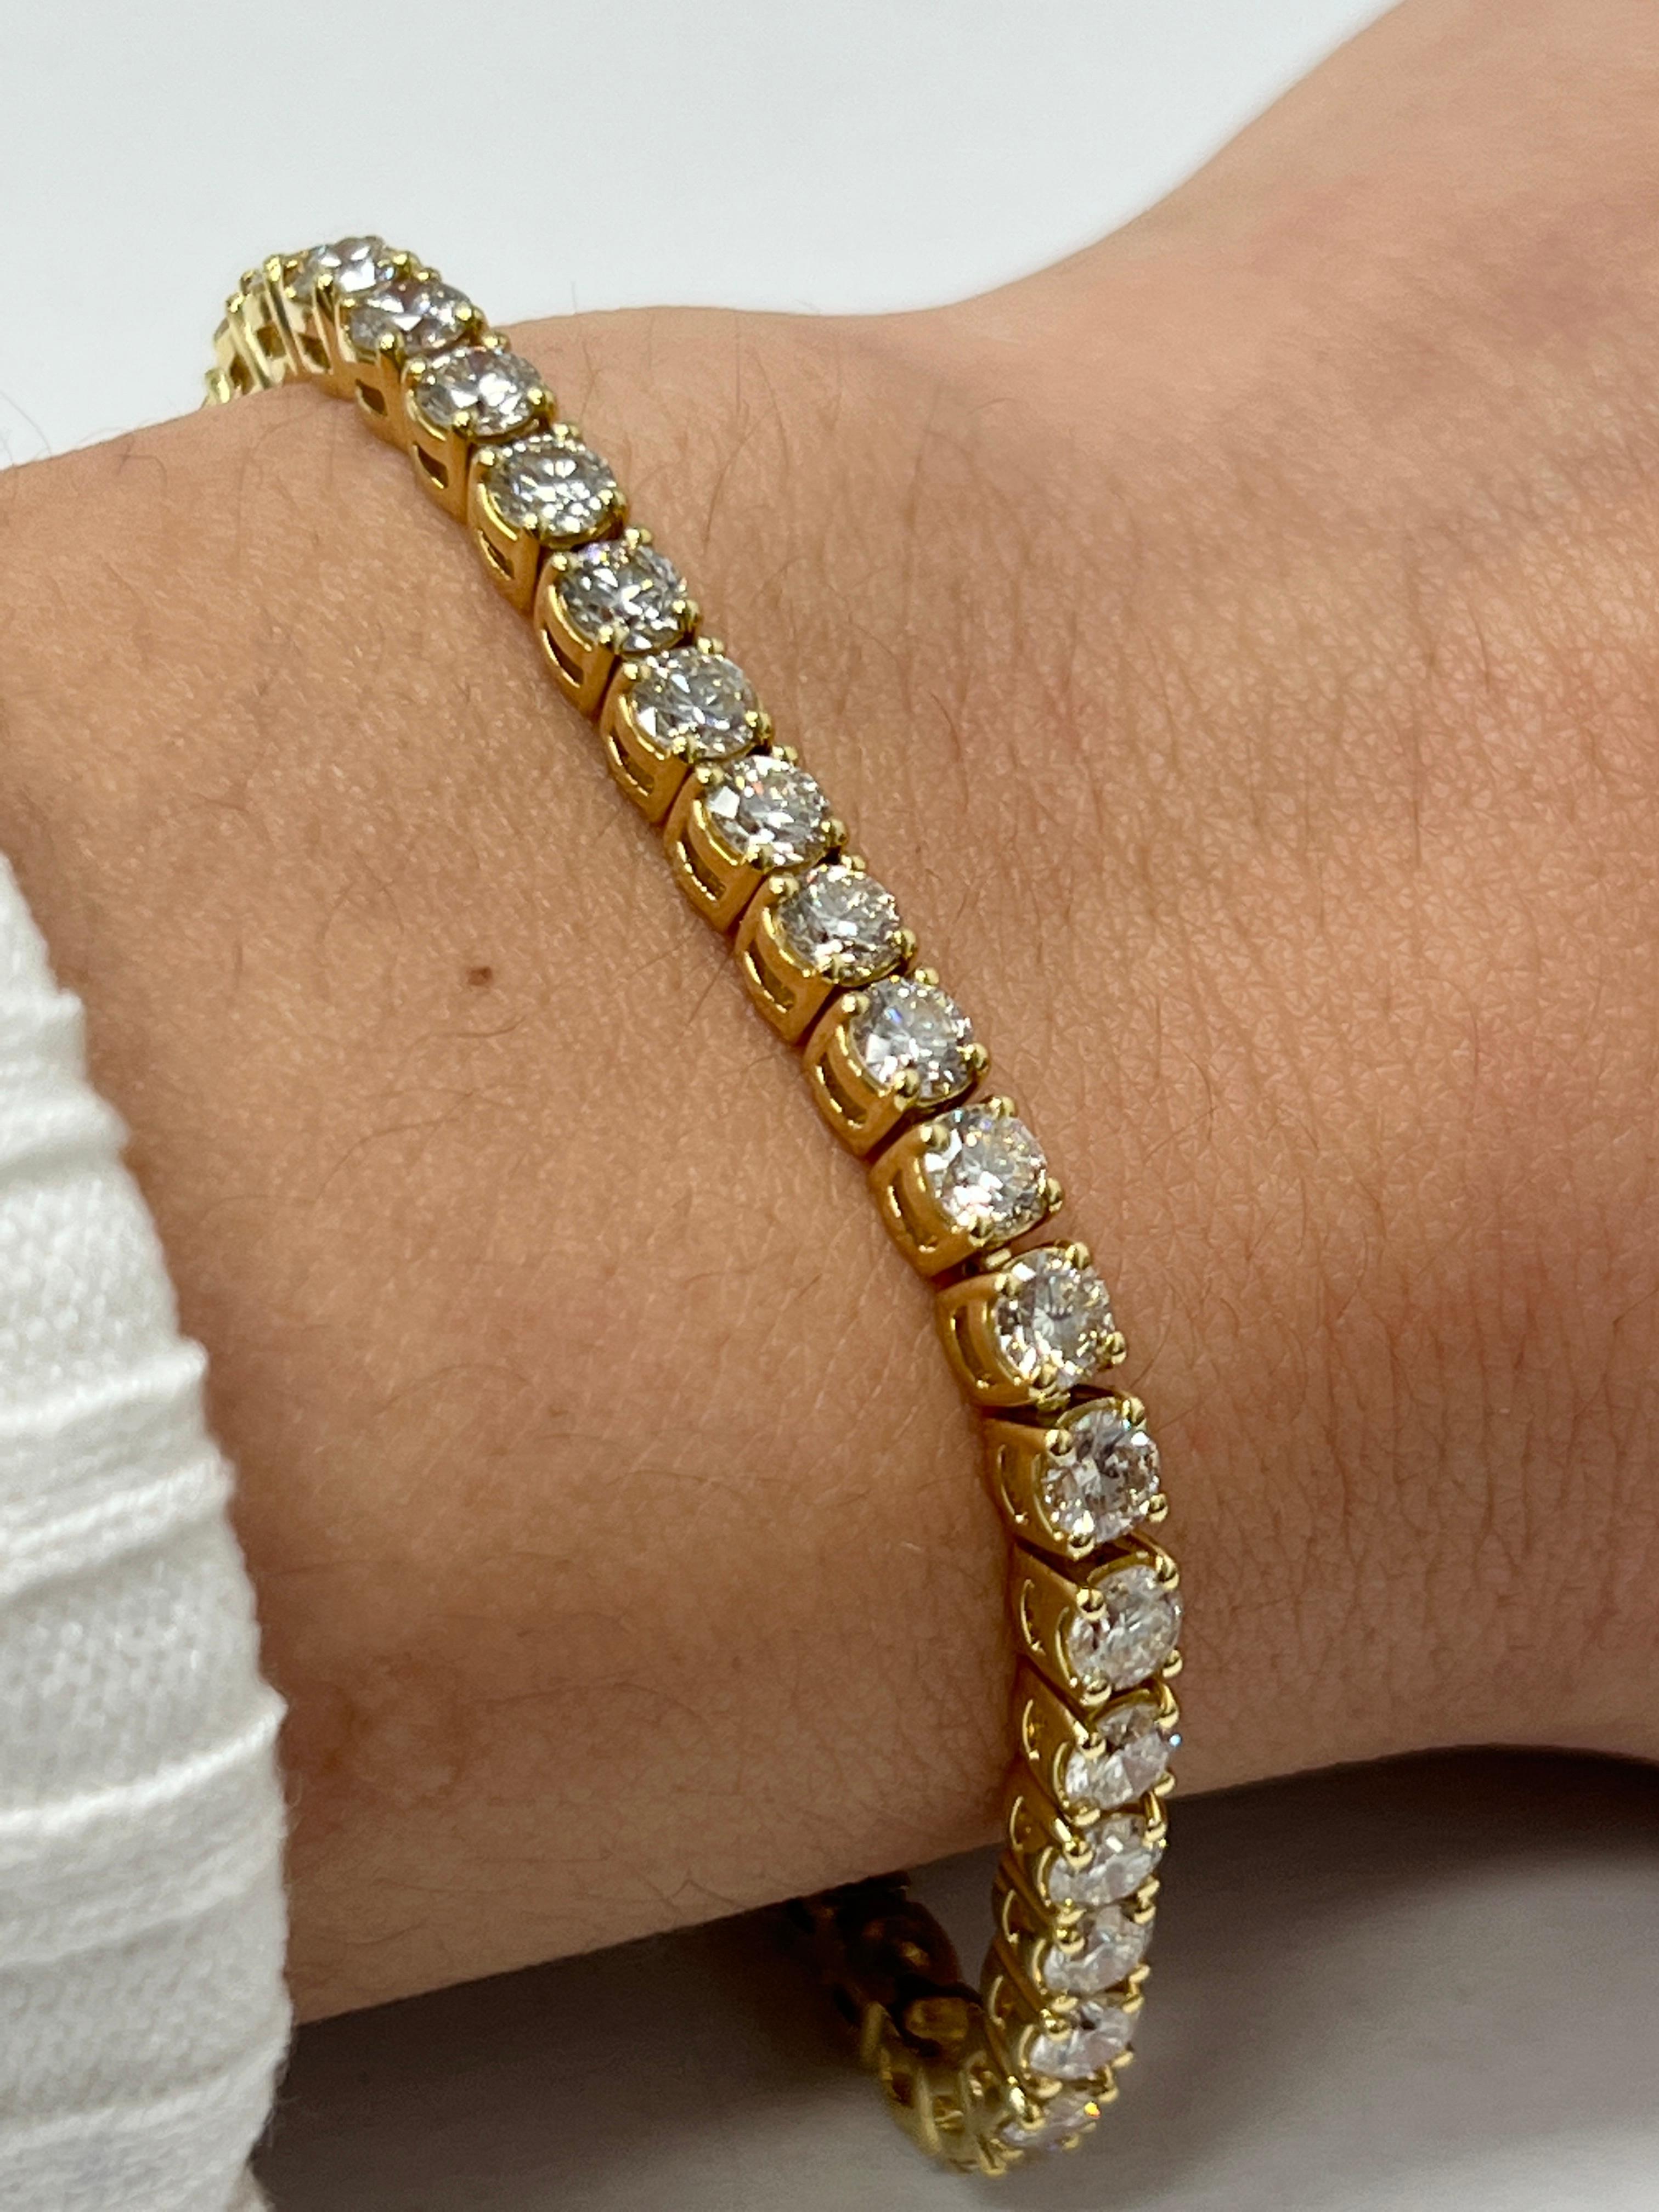 Fashion and glam are at the forefront with this exquisite diamond bracelet. This 18-karat yellow gold diamond bracelet is made from 15 grams of gold. The top is adorned with one row of I-J color, VS/SI clarity diamonds. This bracelet carries 45